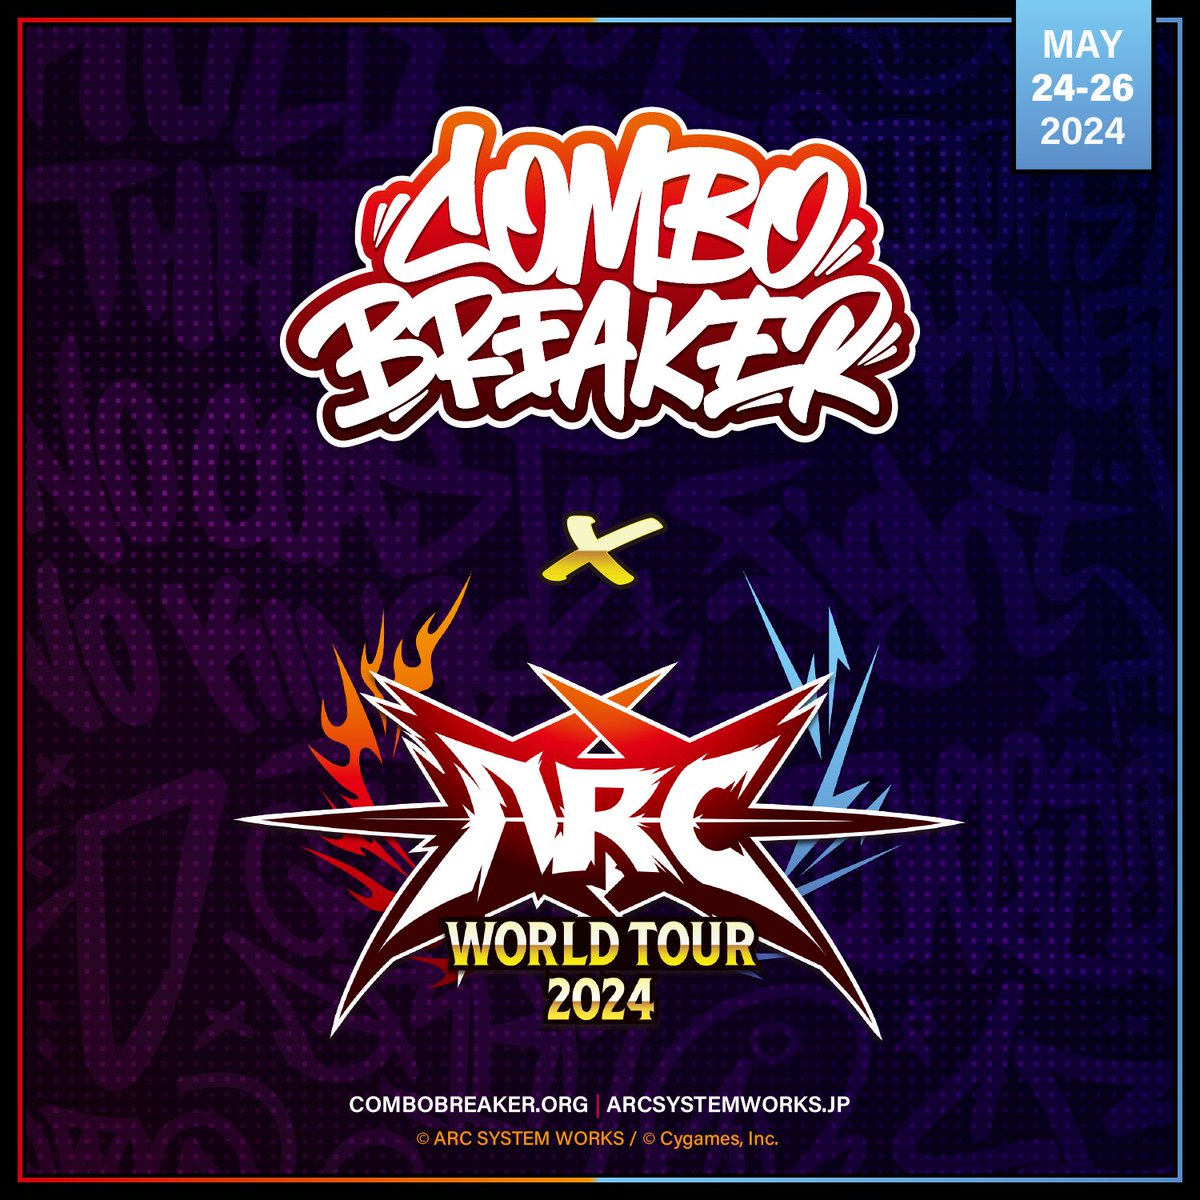 CB is excited to be taking part in the ARC WORLD TOUR 2024! Find out more about our Gold Tier event with @ASWesports at combobreaker.org/awt2024. Don't forget to register for Guilty Gear -Strive- and Granblue Fantasy Versus: Rising today at start.gg/combobreaker!